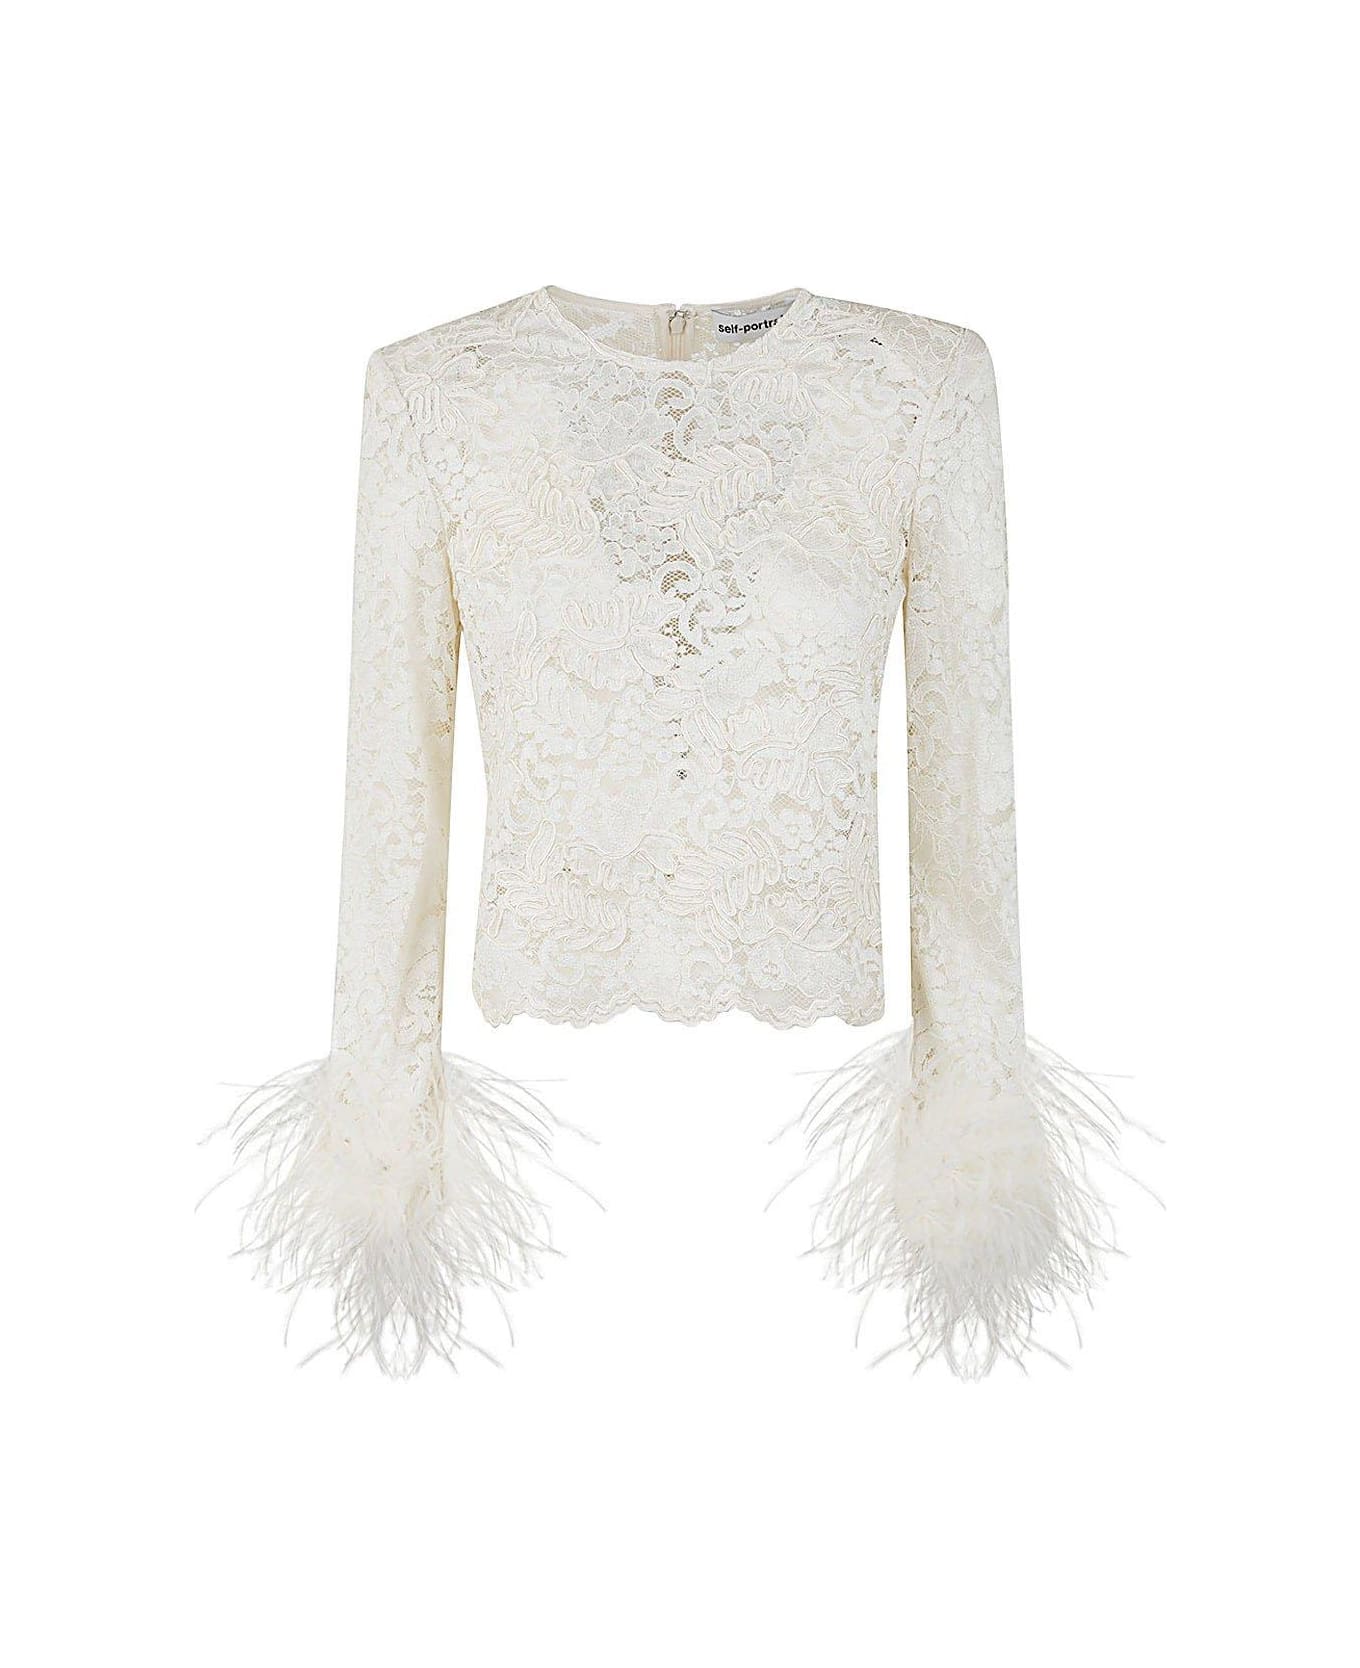 self-portrait Lace-detailed Long-sleeved Top - Cream